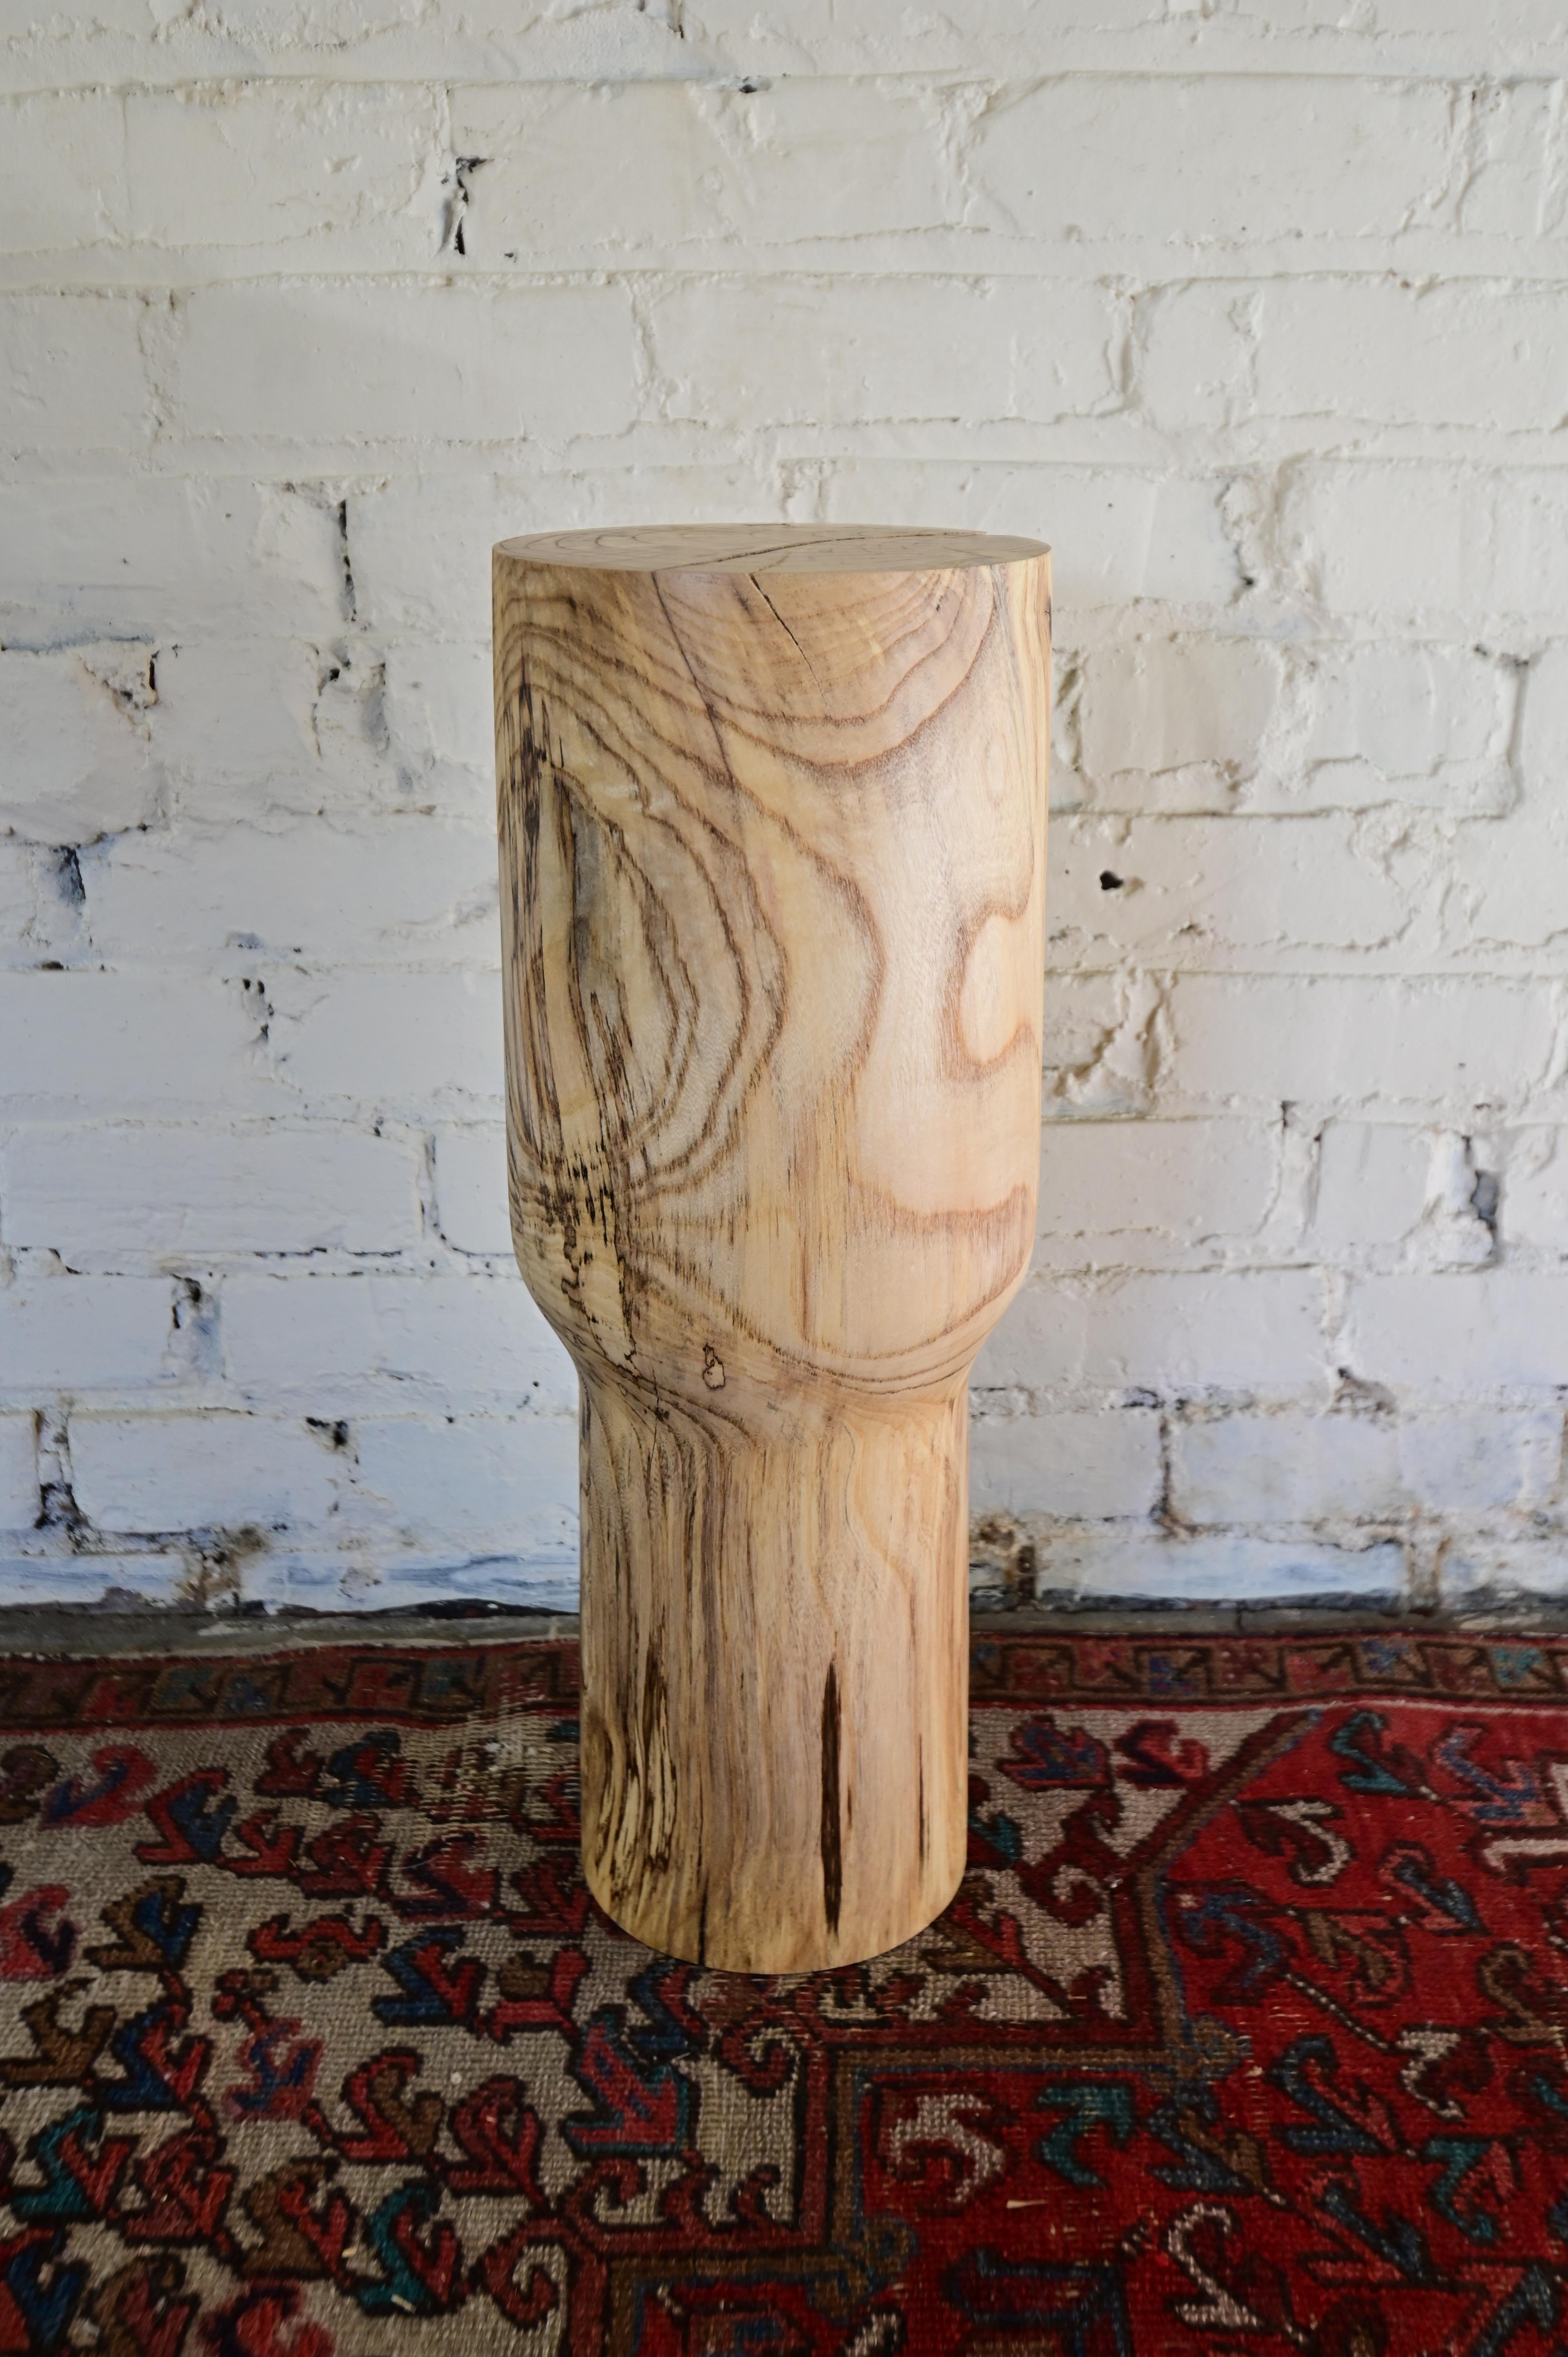 Original design, hand carved wooden end table by the artist. Made from solid hackberry which tends to have incredible figuring, and high contrast spalting (black lines) against the white wood. Piece measures 22.5